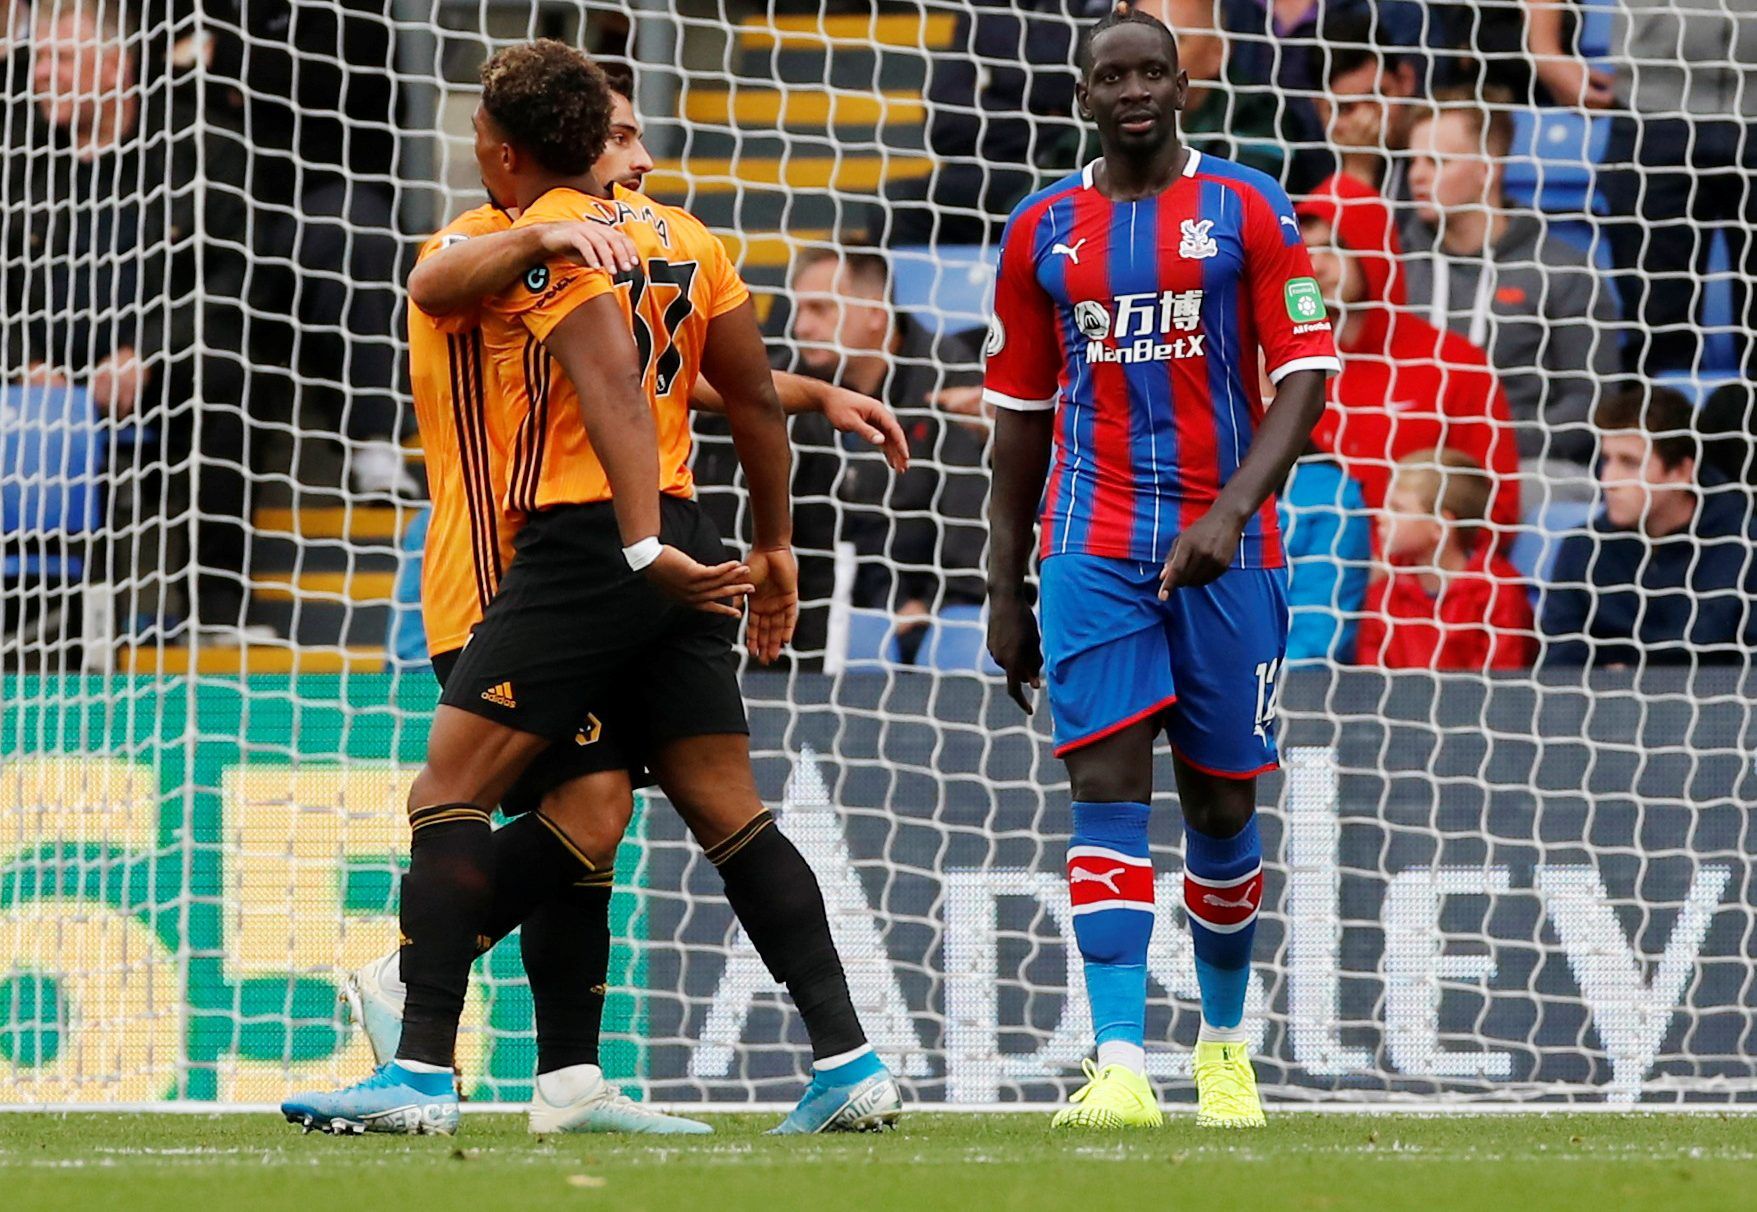 Soccer Football - Premier League - Crystal Palace v Wolverhampton Wanderers - Selhurst Park, London, Britain - September 22, 2019  Crystal Palace's Mamadou Sakho looks dejected as Wolverhampton Wanderers' Adama Traore and Jonny celebrate after Diogo Jota scored their first goal  Action Images via Reuters/Andrew Boyers  EDITORIAL USE ONLY. No use with unauthorized audio, video, data, fixture lists, club/league logos or 